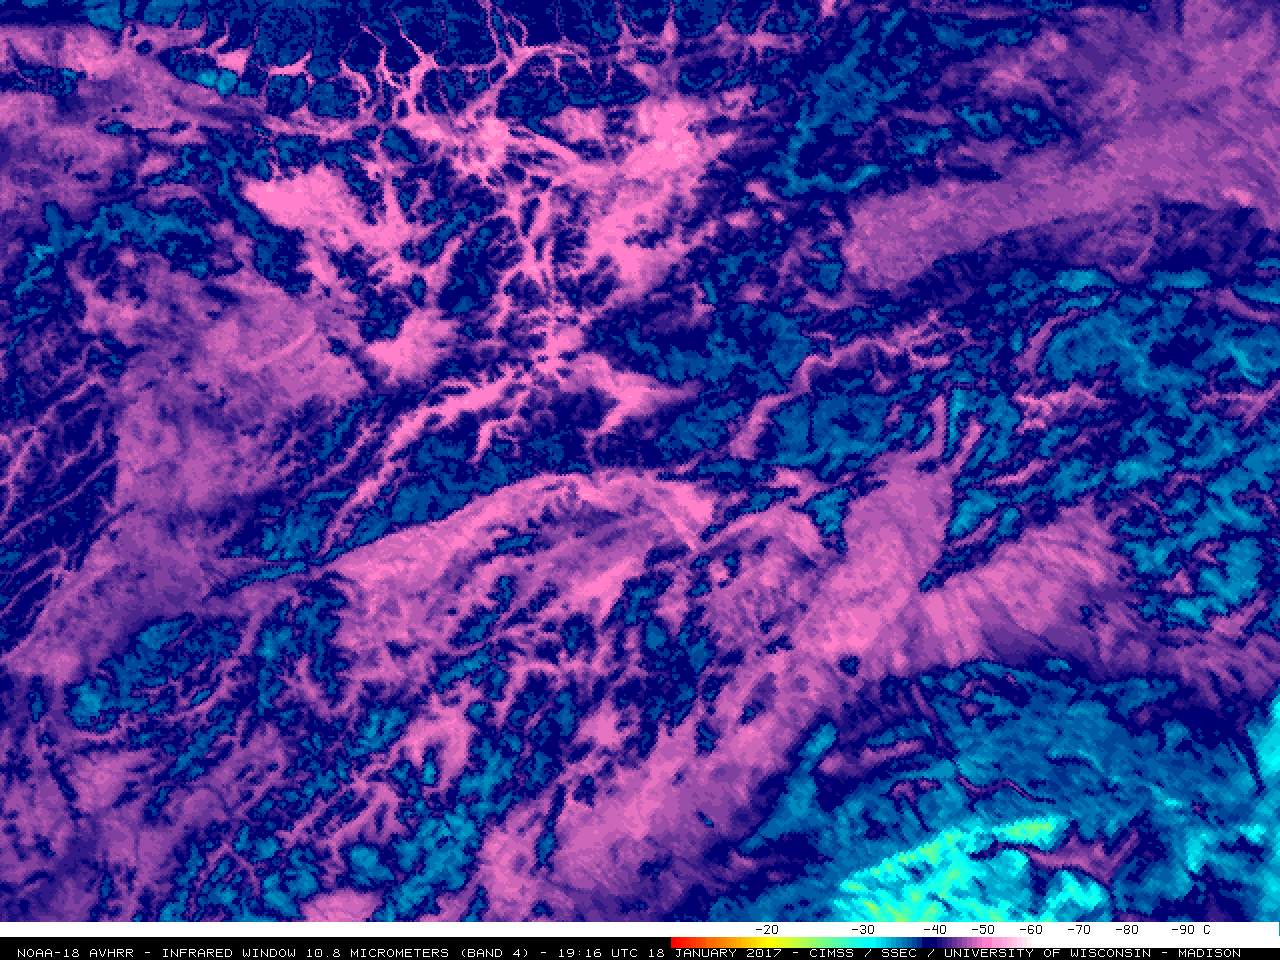 NOAA-18 AVHRR Infrared Window (10.8 µm) image centered on Tanana (PATA), with surface air temperatures and corresponding station identifications [click to enlarge]